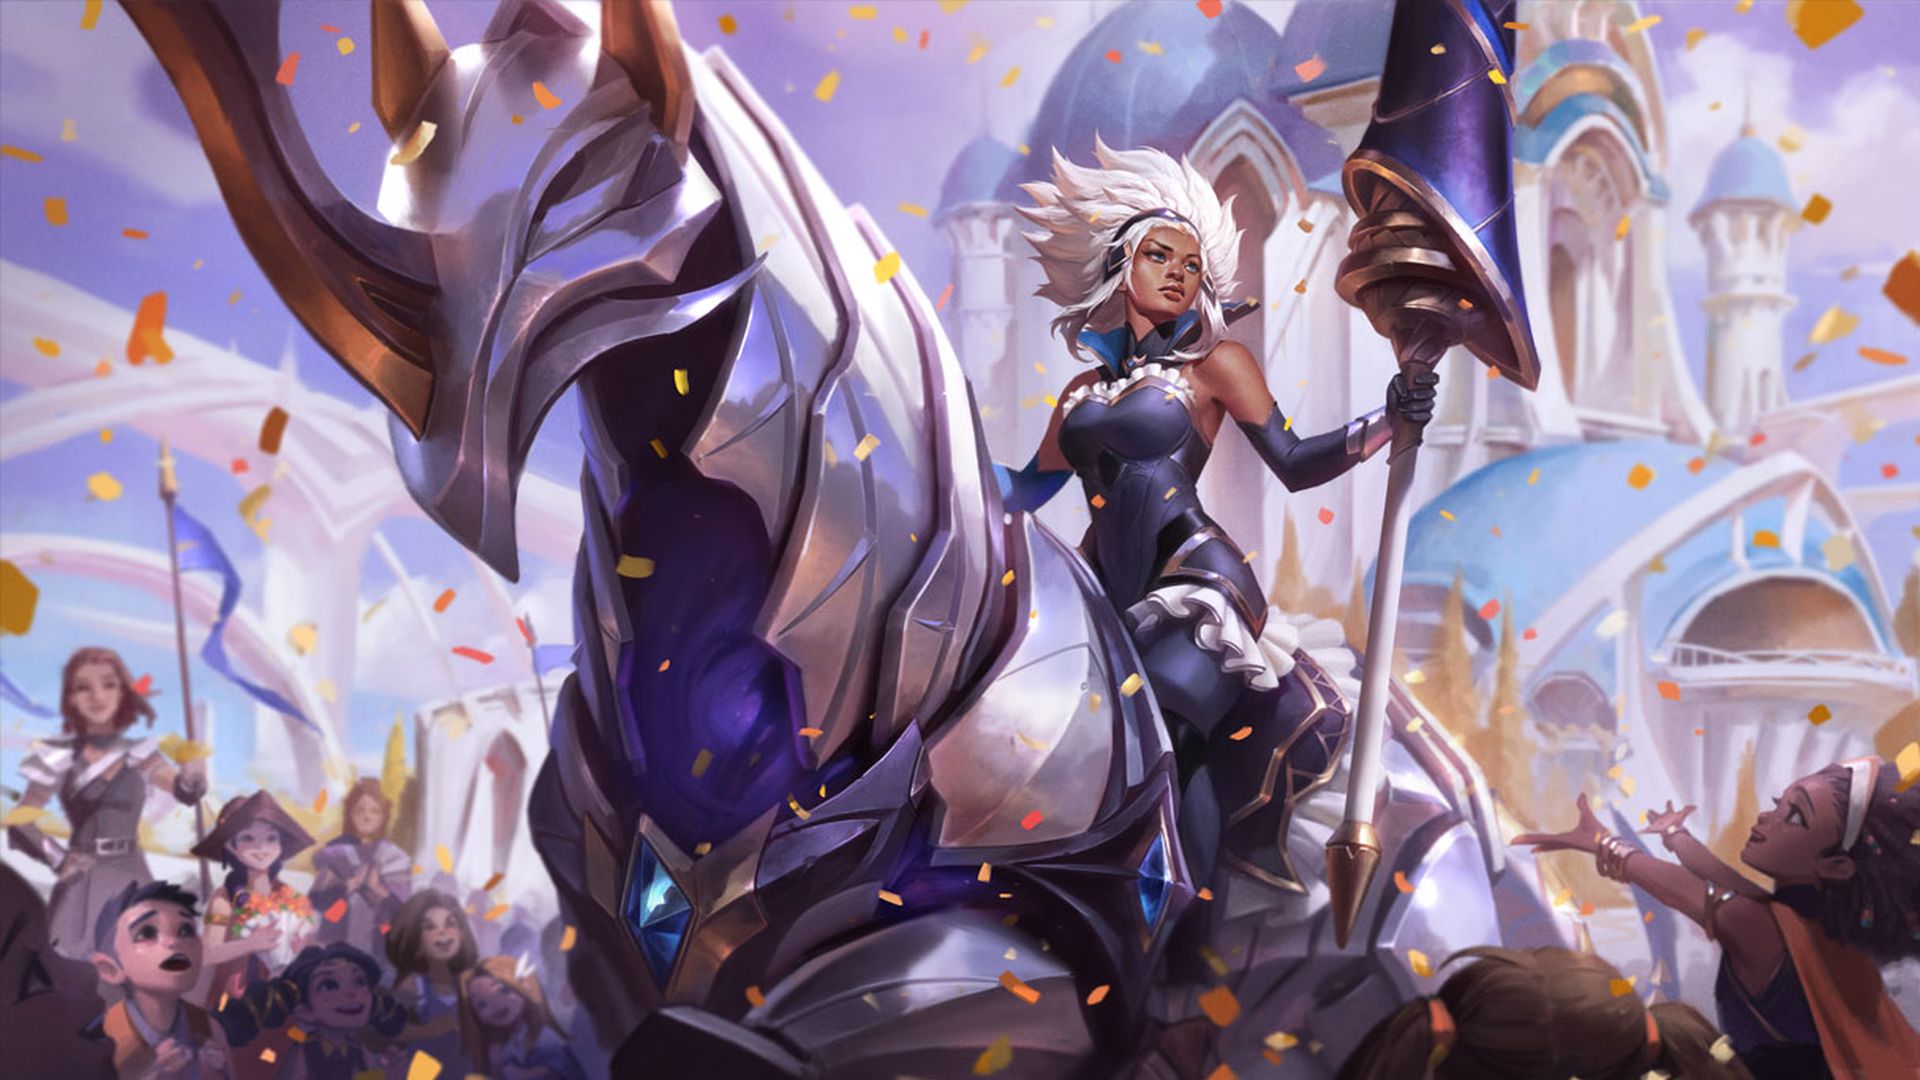 League of Legends 11.1 Patch Notes - New Season Begins! 